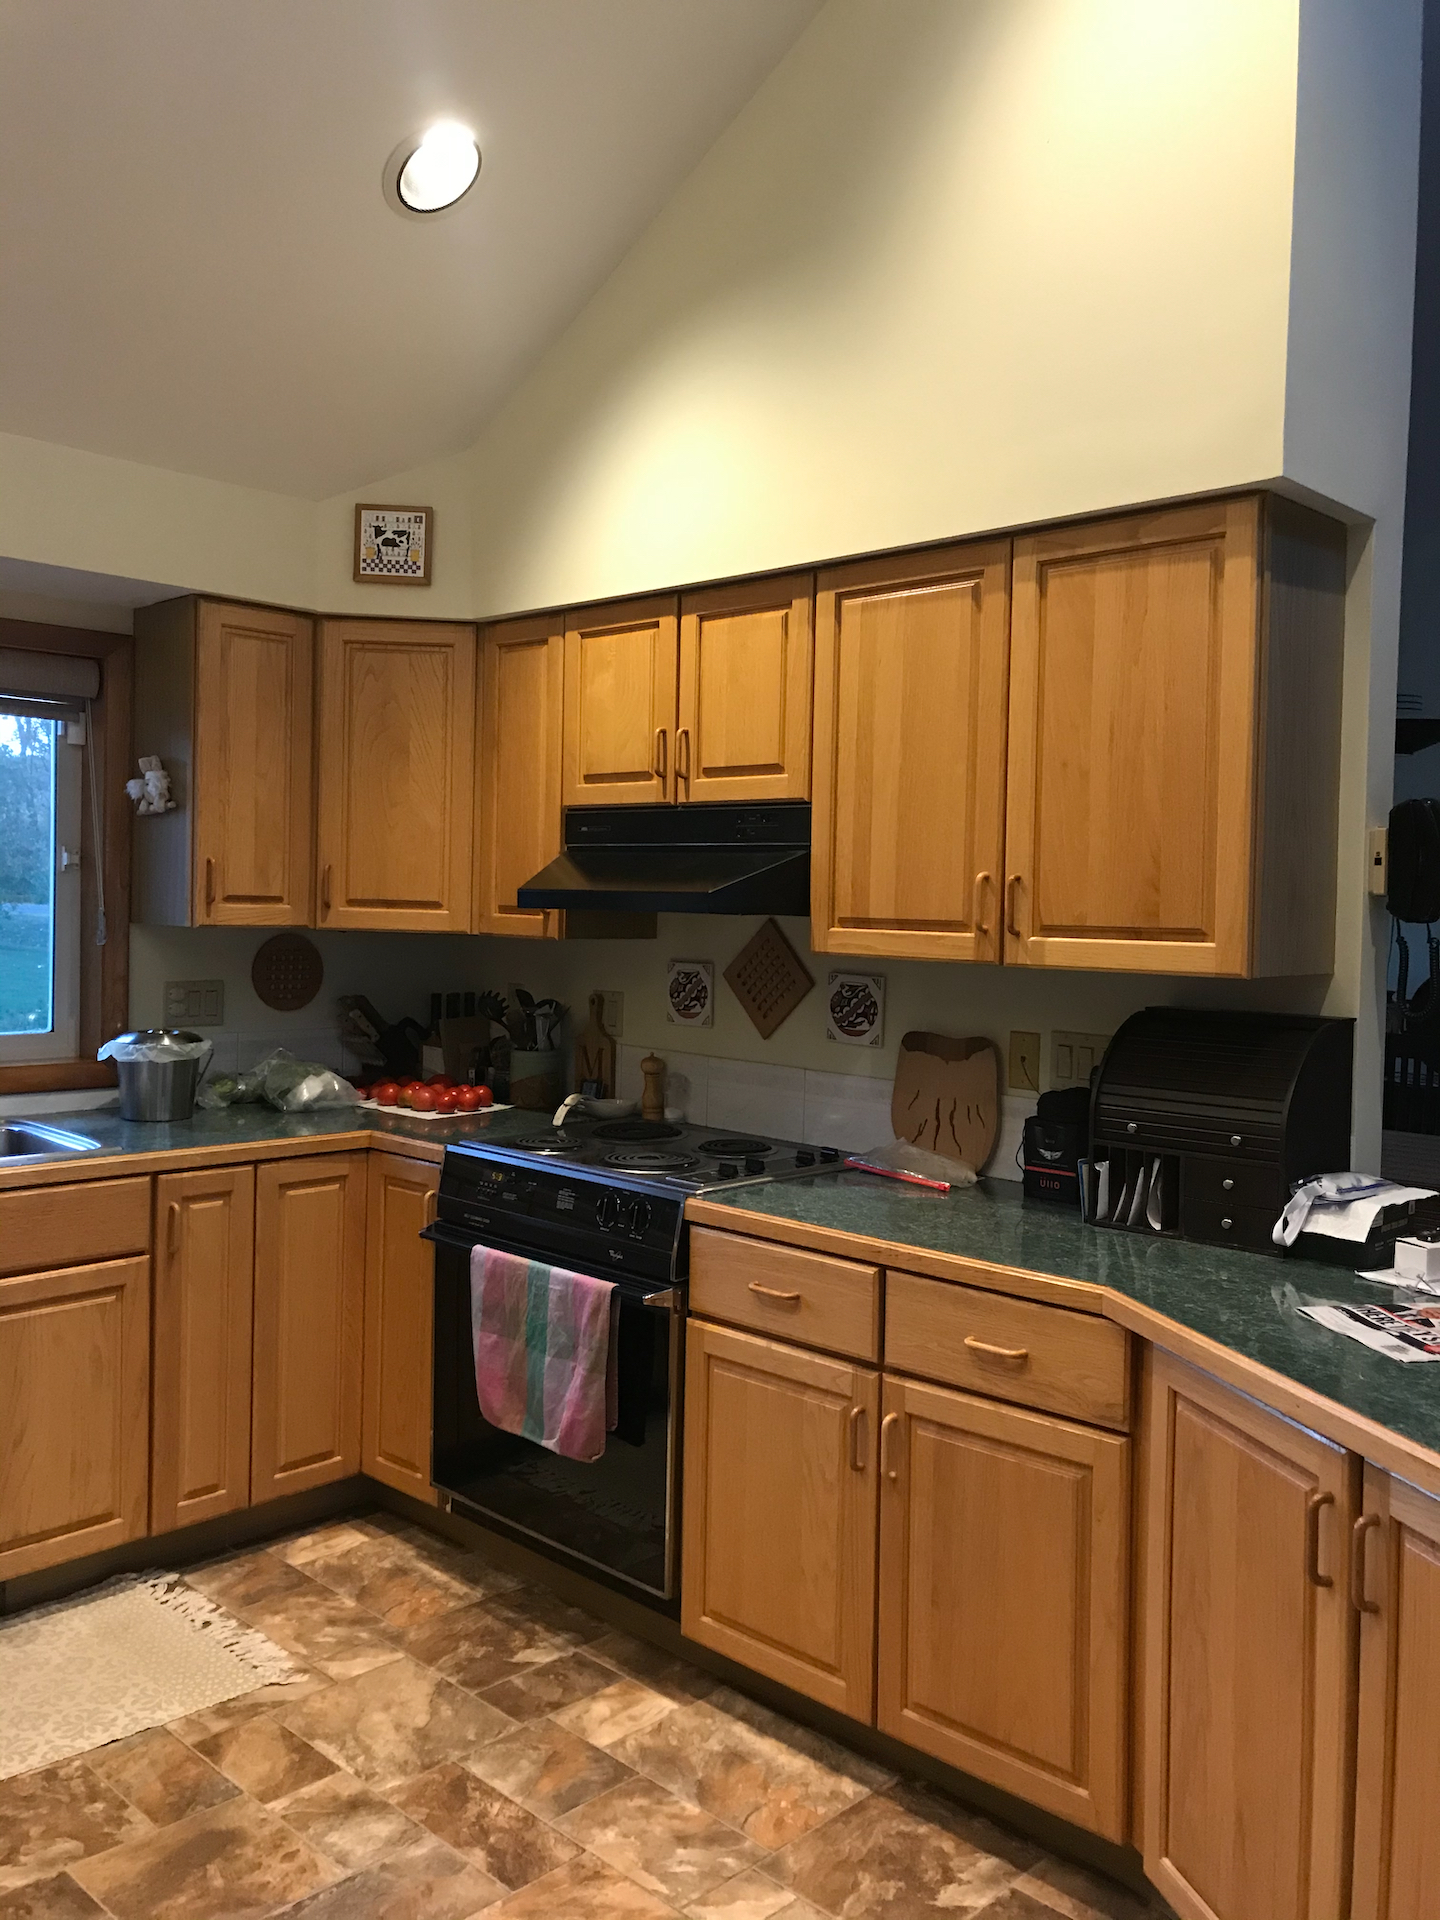 Kitchen before being remodeled in the Trumansburg neighborhod of Ithaca NY